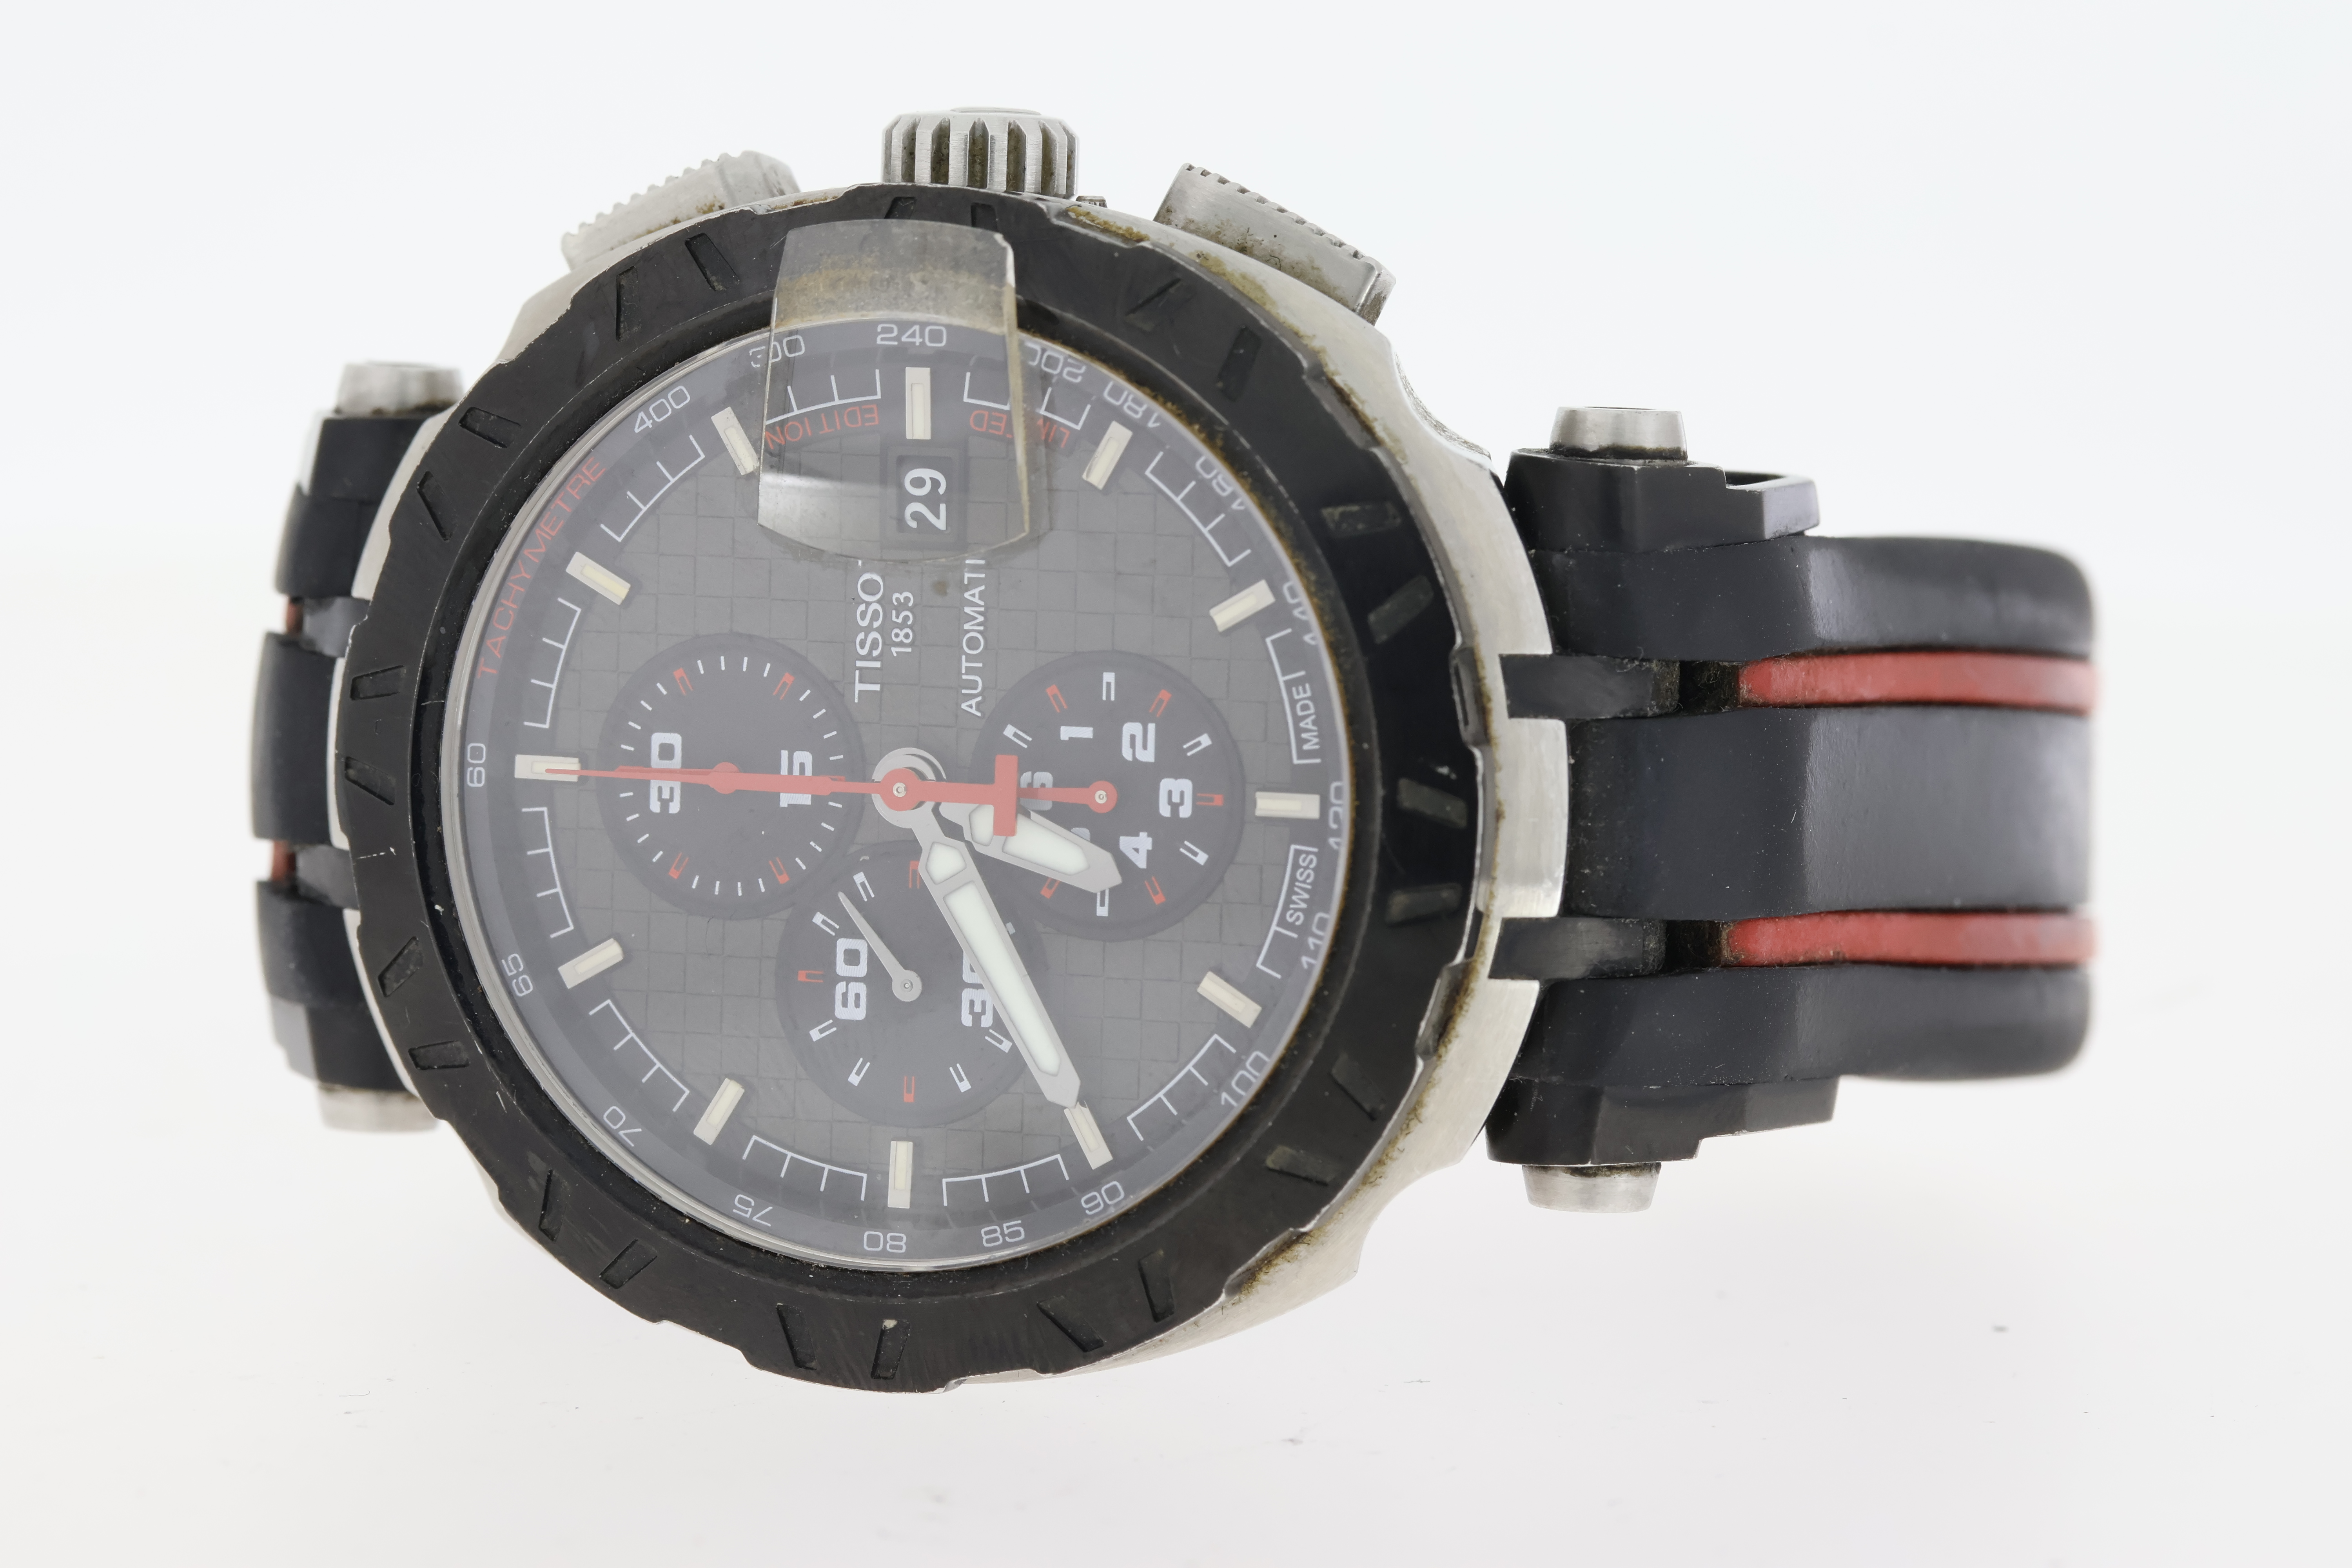 Tissot T-Race Limited Edition Moto GP World Championships Chronograph Automatic - Image 2 of 3